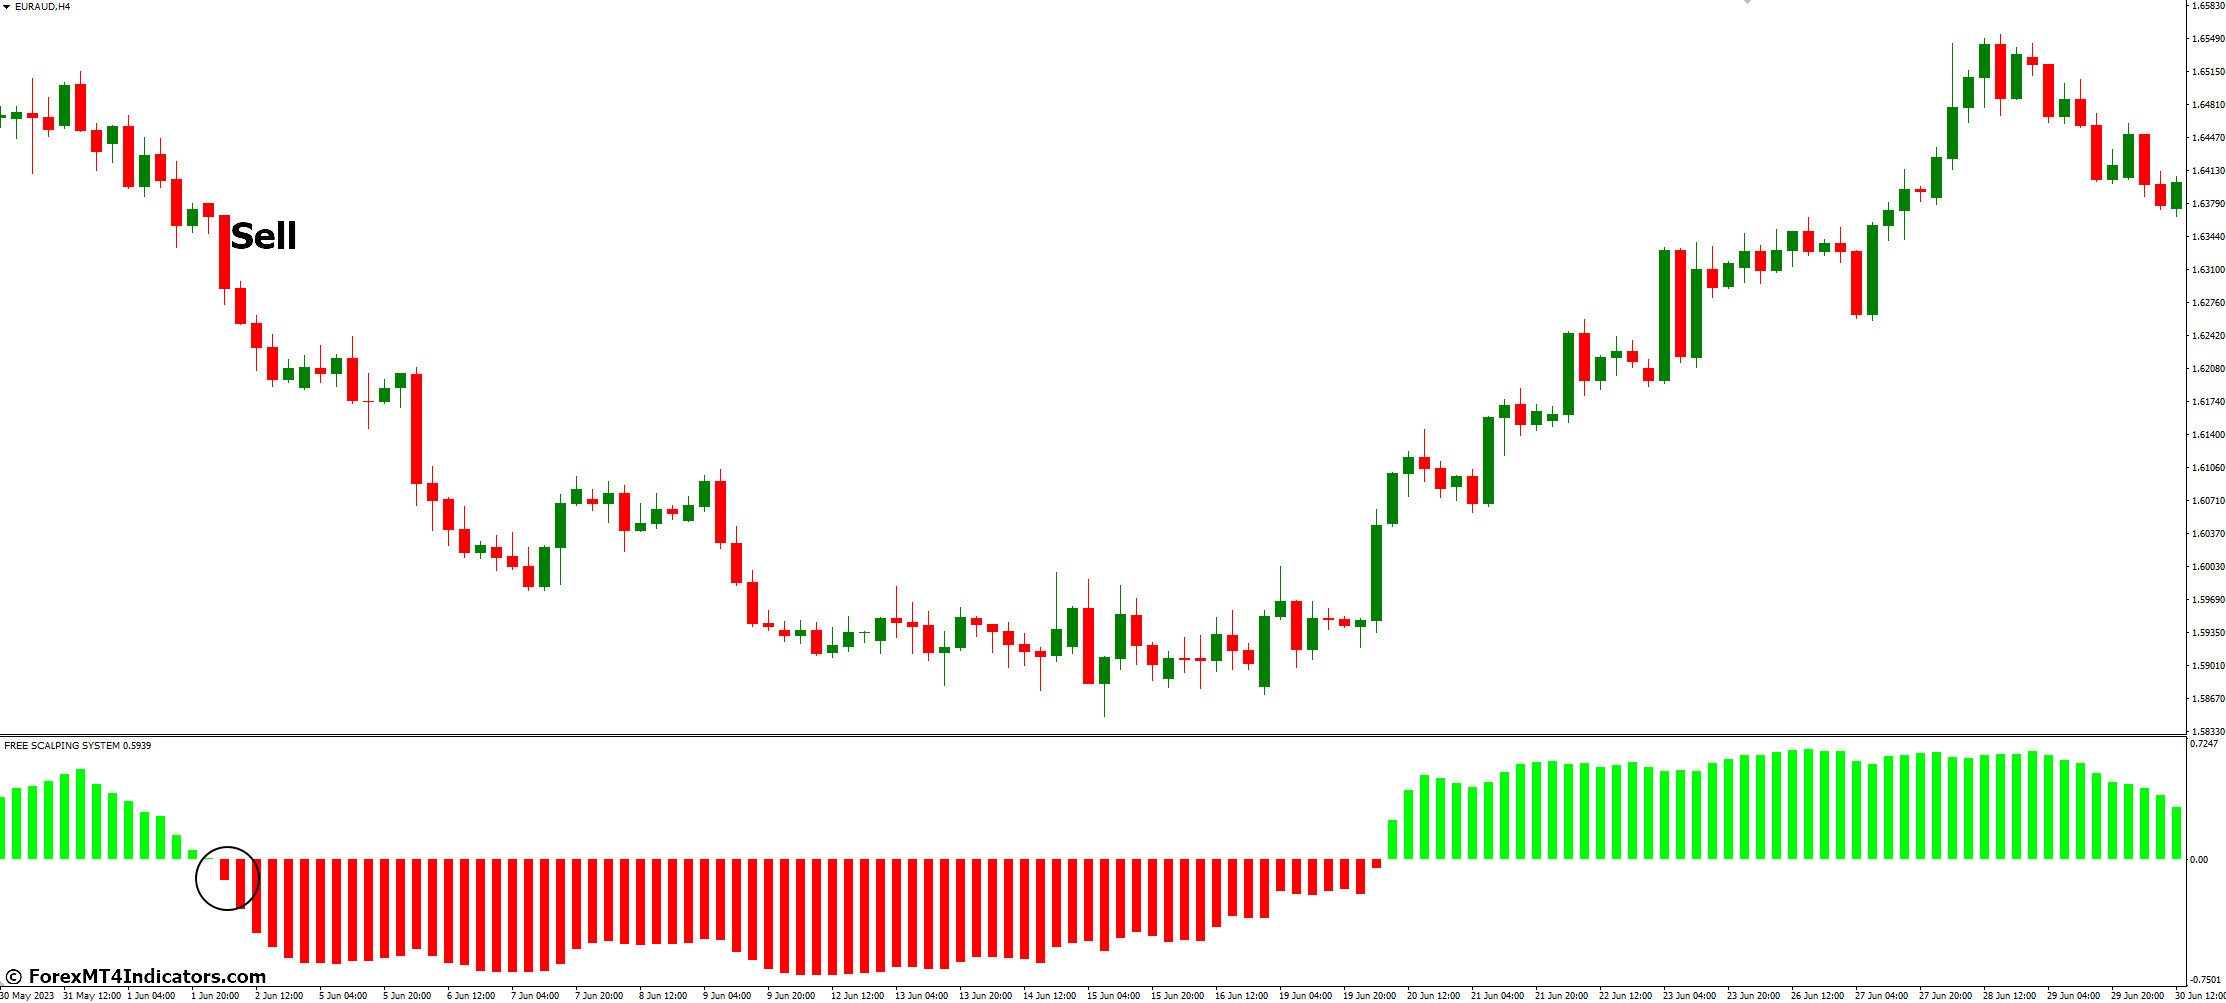 How to Trade with Free Scalping MT4 Indicator - Sell Entry